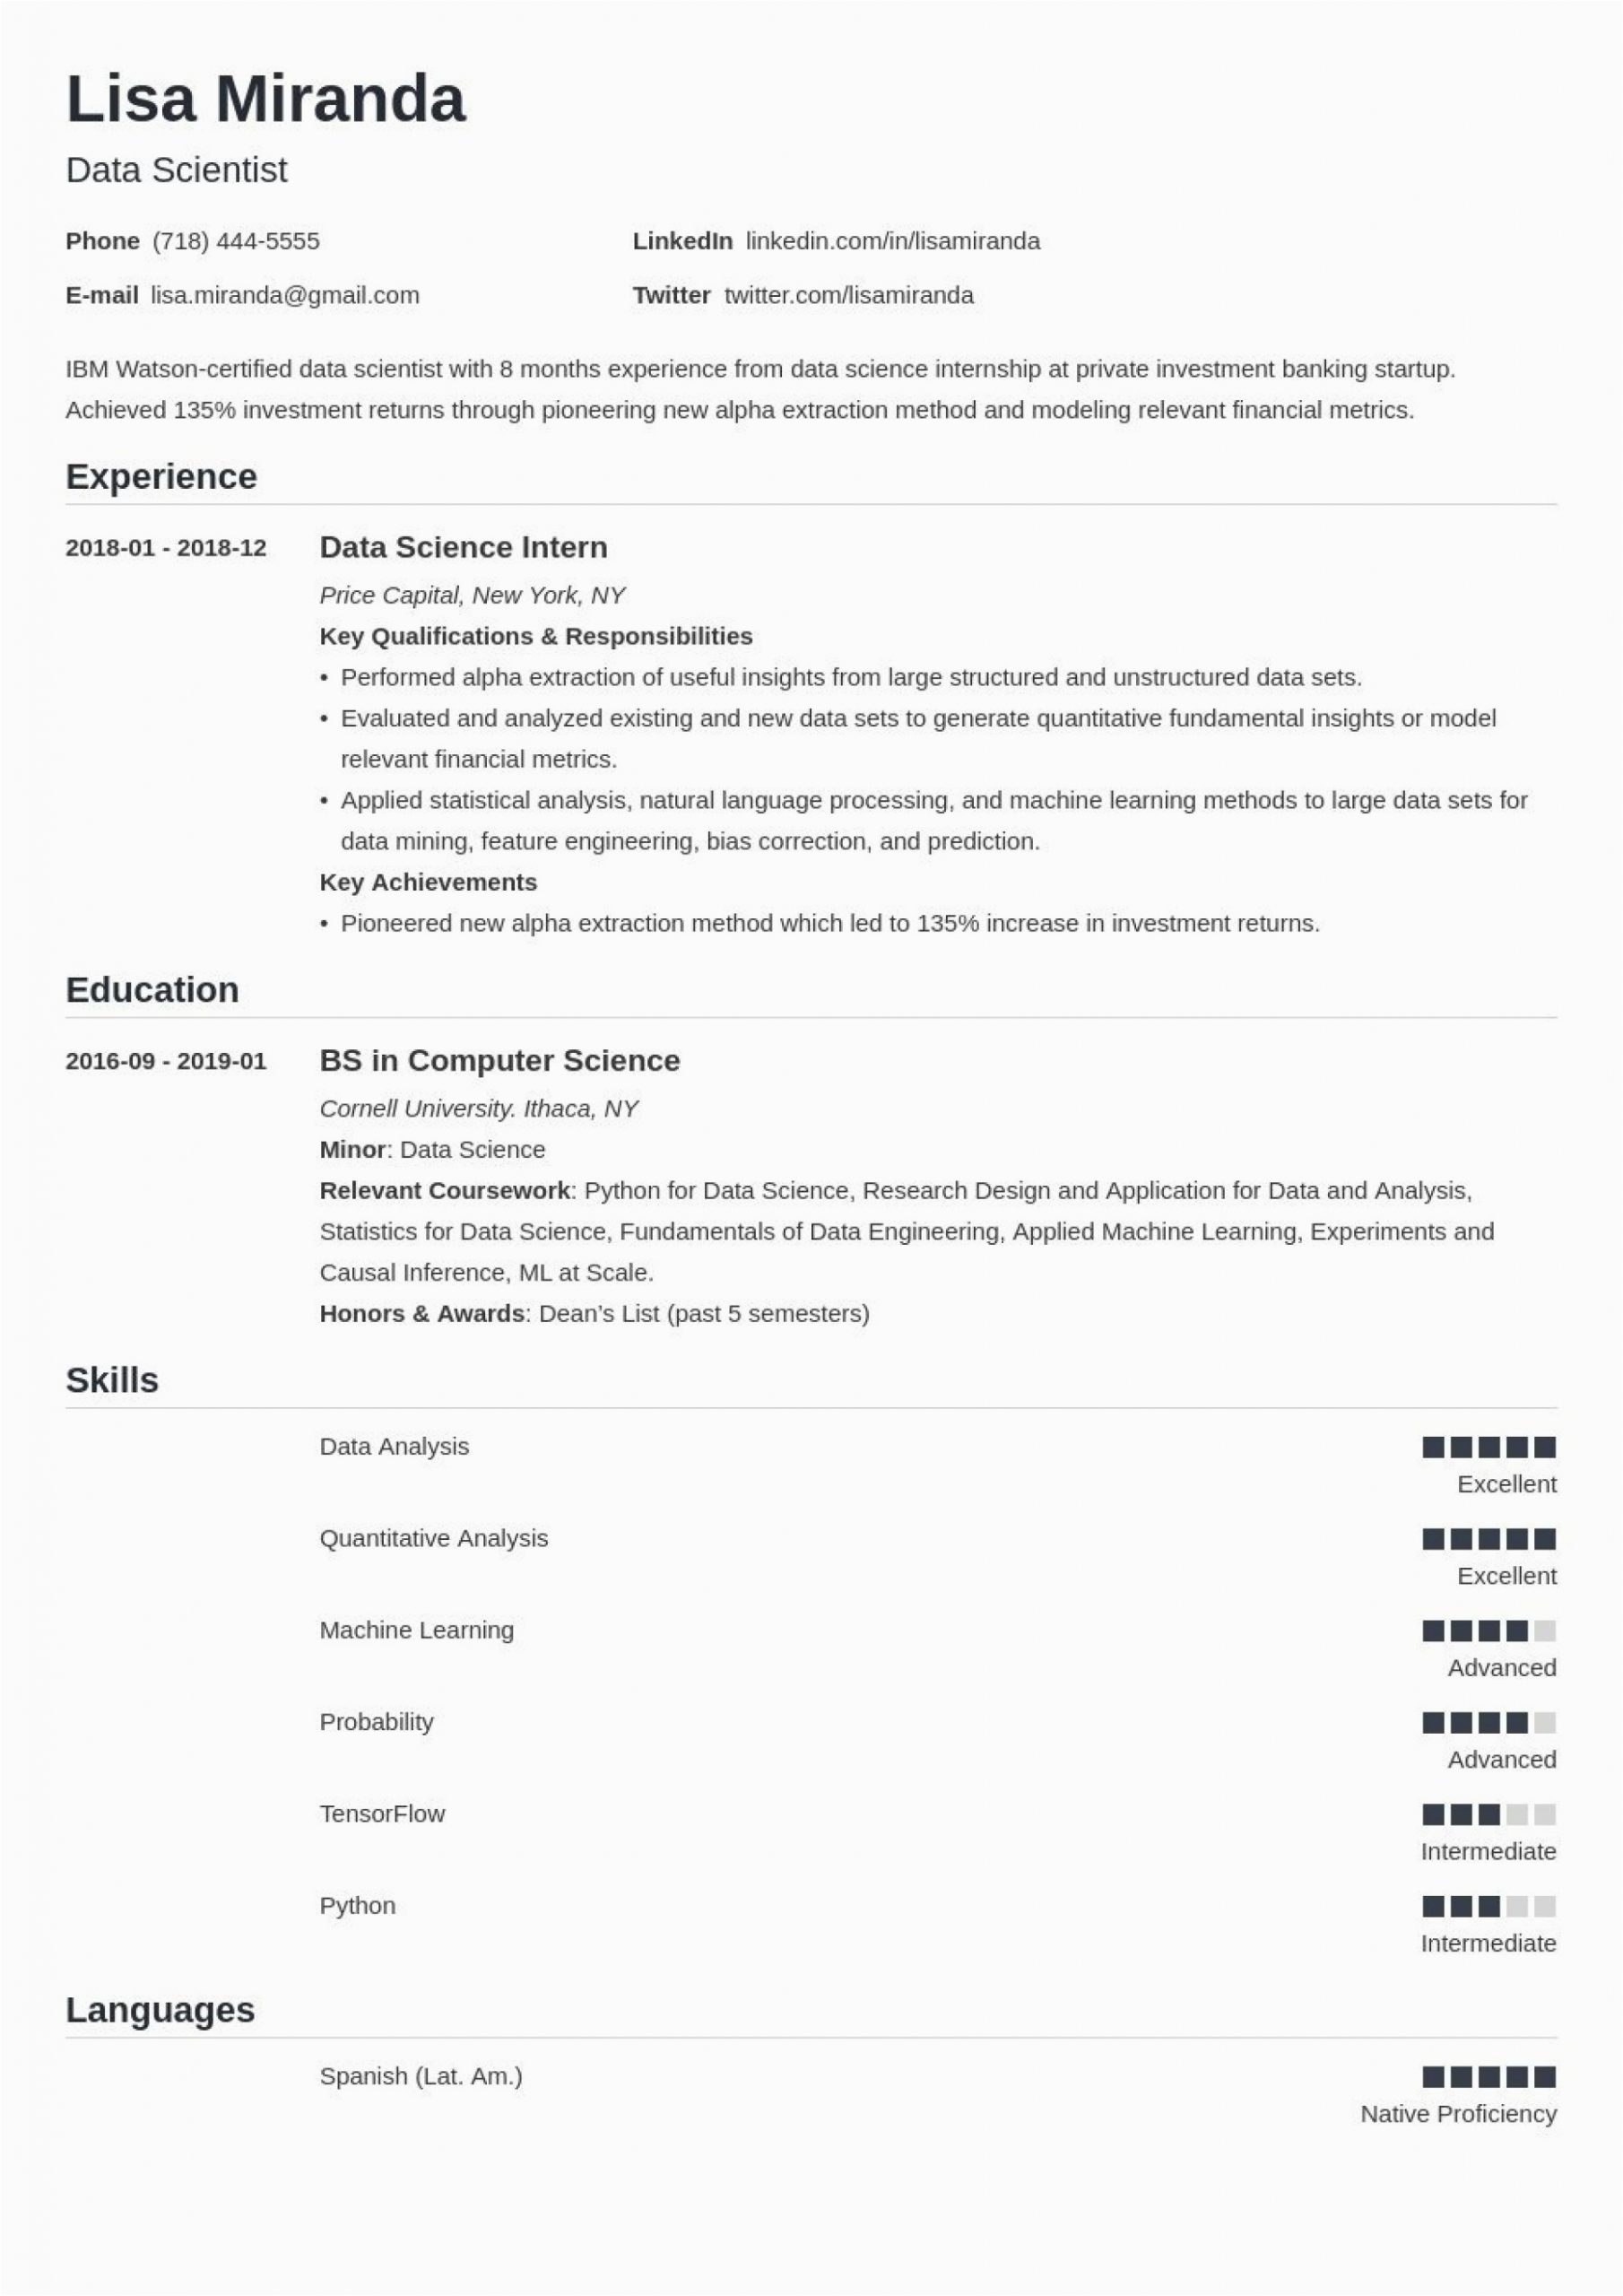 Free Resume Templates for Recent College Graduates Recent College Graduate Resume Template Addictionary